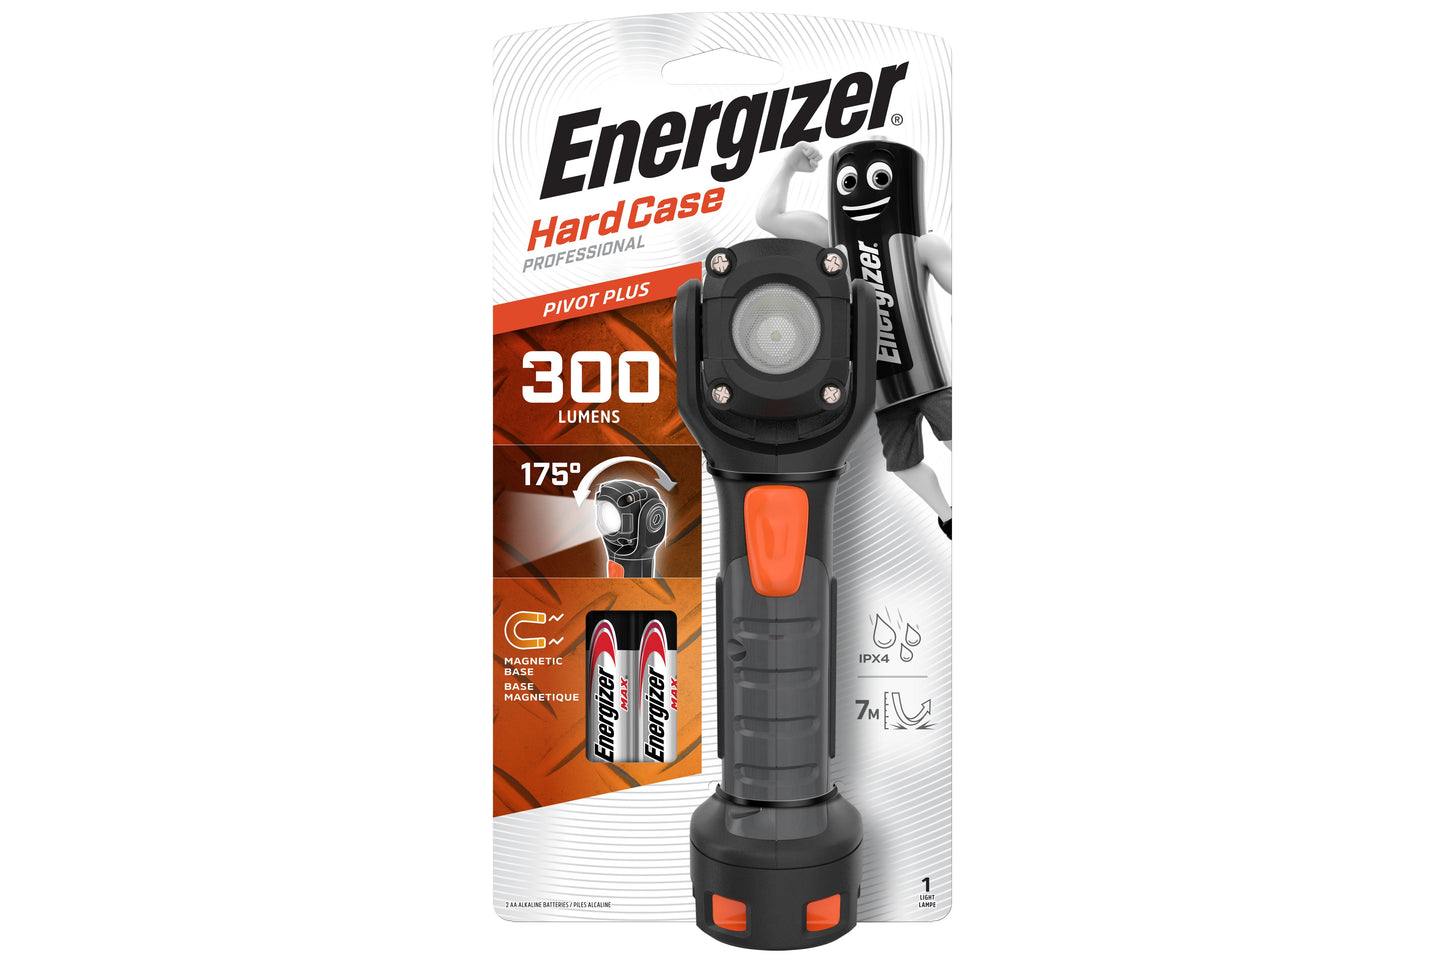 Energizer Hard Case 300 Lumens Pivot Rotating Head LED Torch with Magnetic Base & 2x AA Batteries - maplin.co.uk